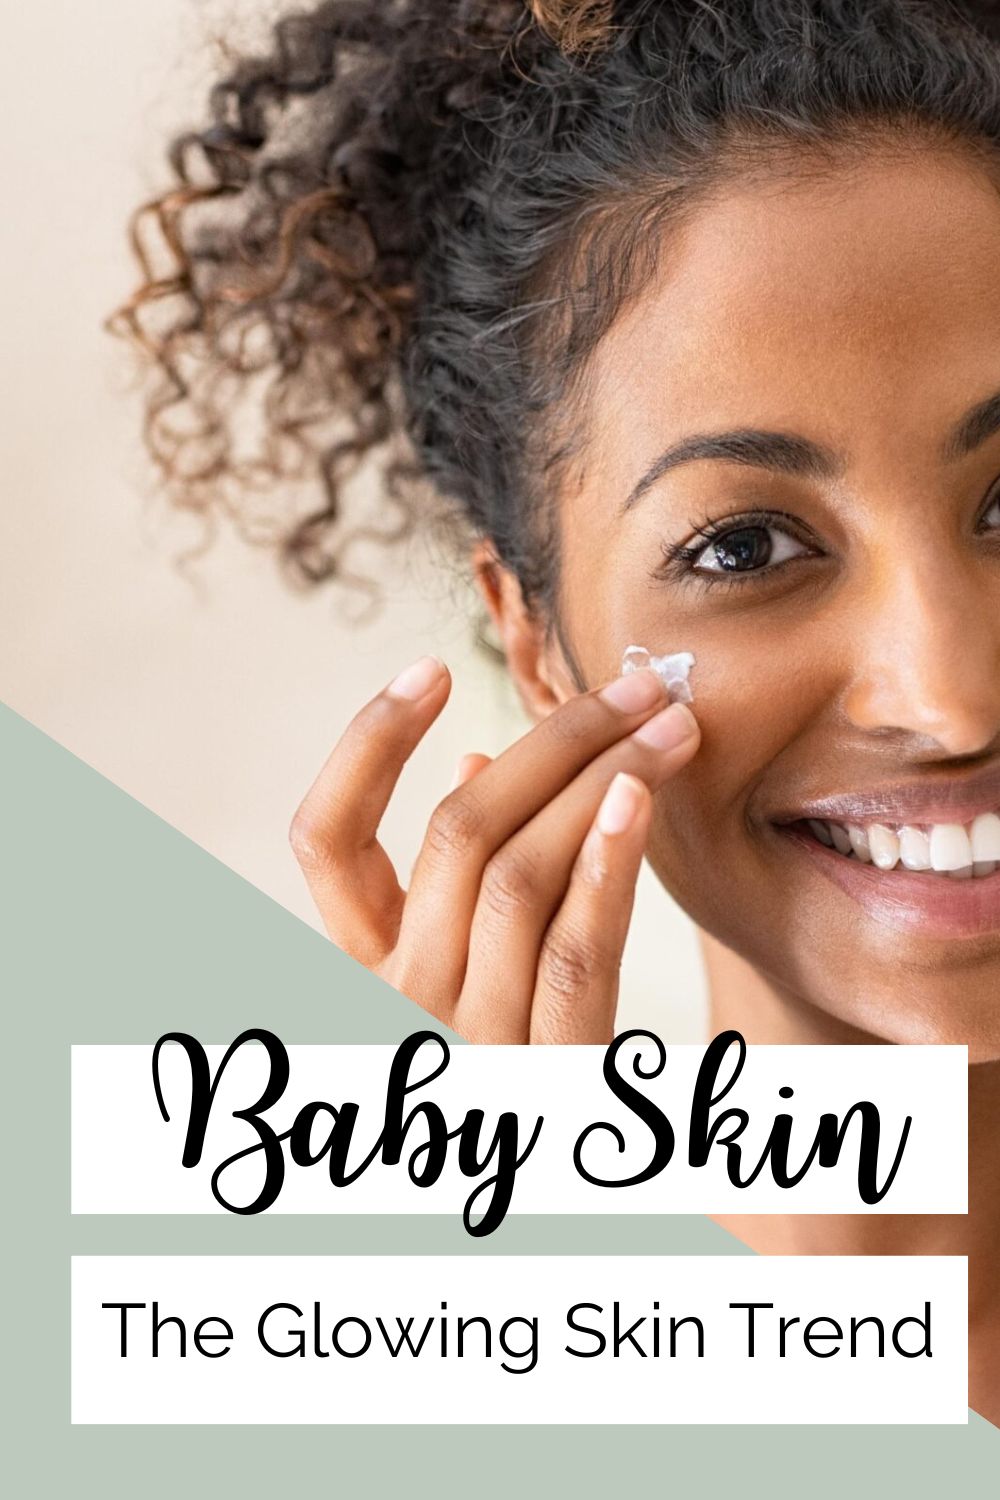 The baby skin trend